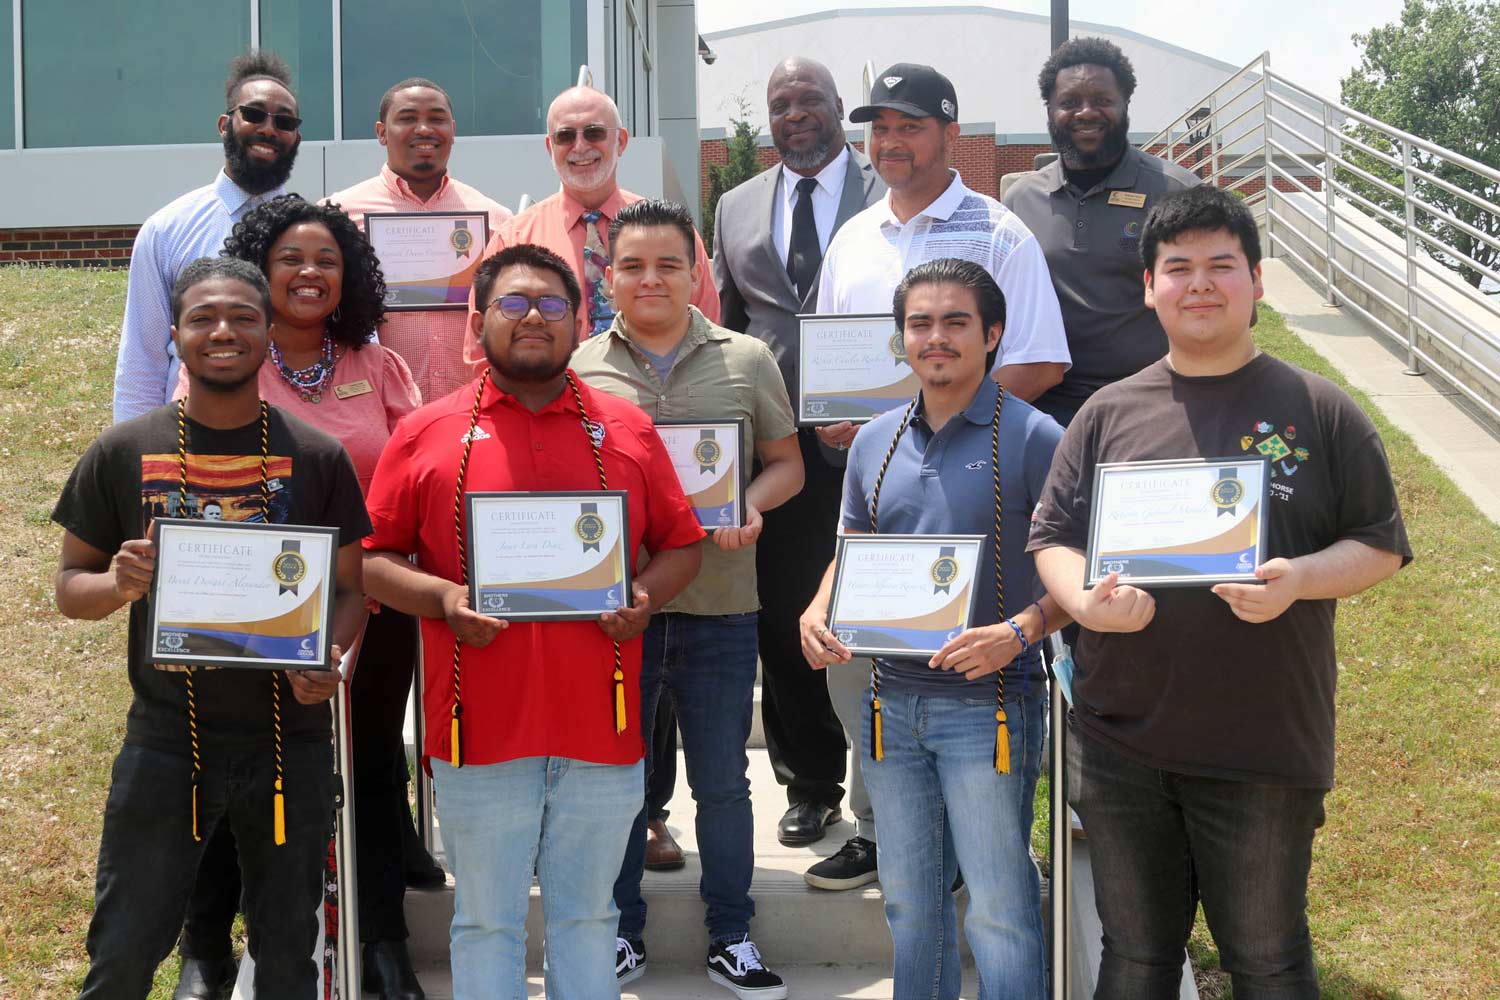 Click to enlarge,  Central Carolina Community College Brothers of Excellence award recipients along with mentors / advisors include, left to right: first row, Brent Alexander, Jairo Diaz, Hector Ramirez, and Roberto Morales; second row, Candice Solis, Leo Hernandez Cristobal, and Rickie Rembert; third row, Zack Ledwell, Kenneth Caraway, Gary Blankenship, Doug Wells, and Anthony Farrior. 